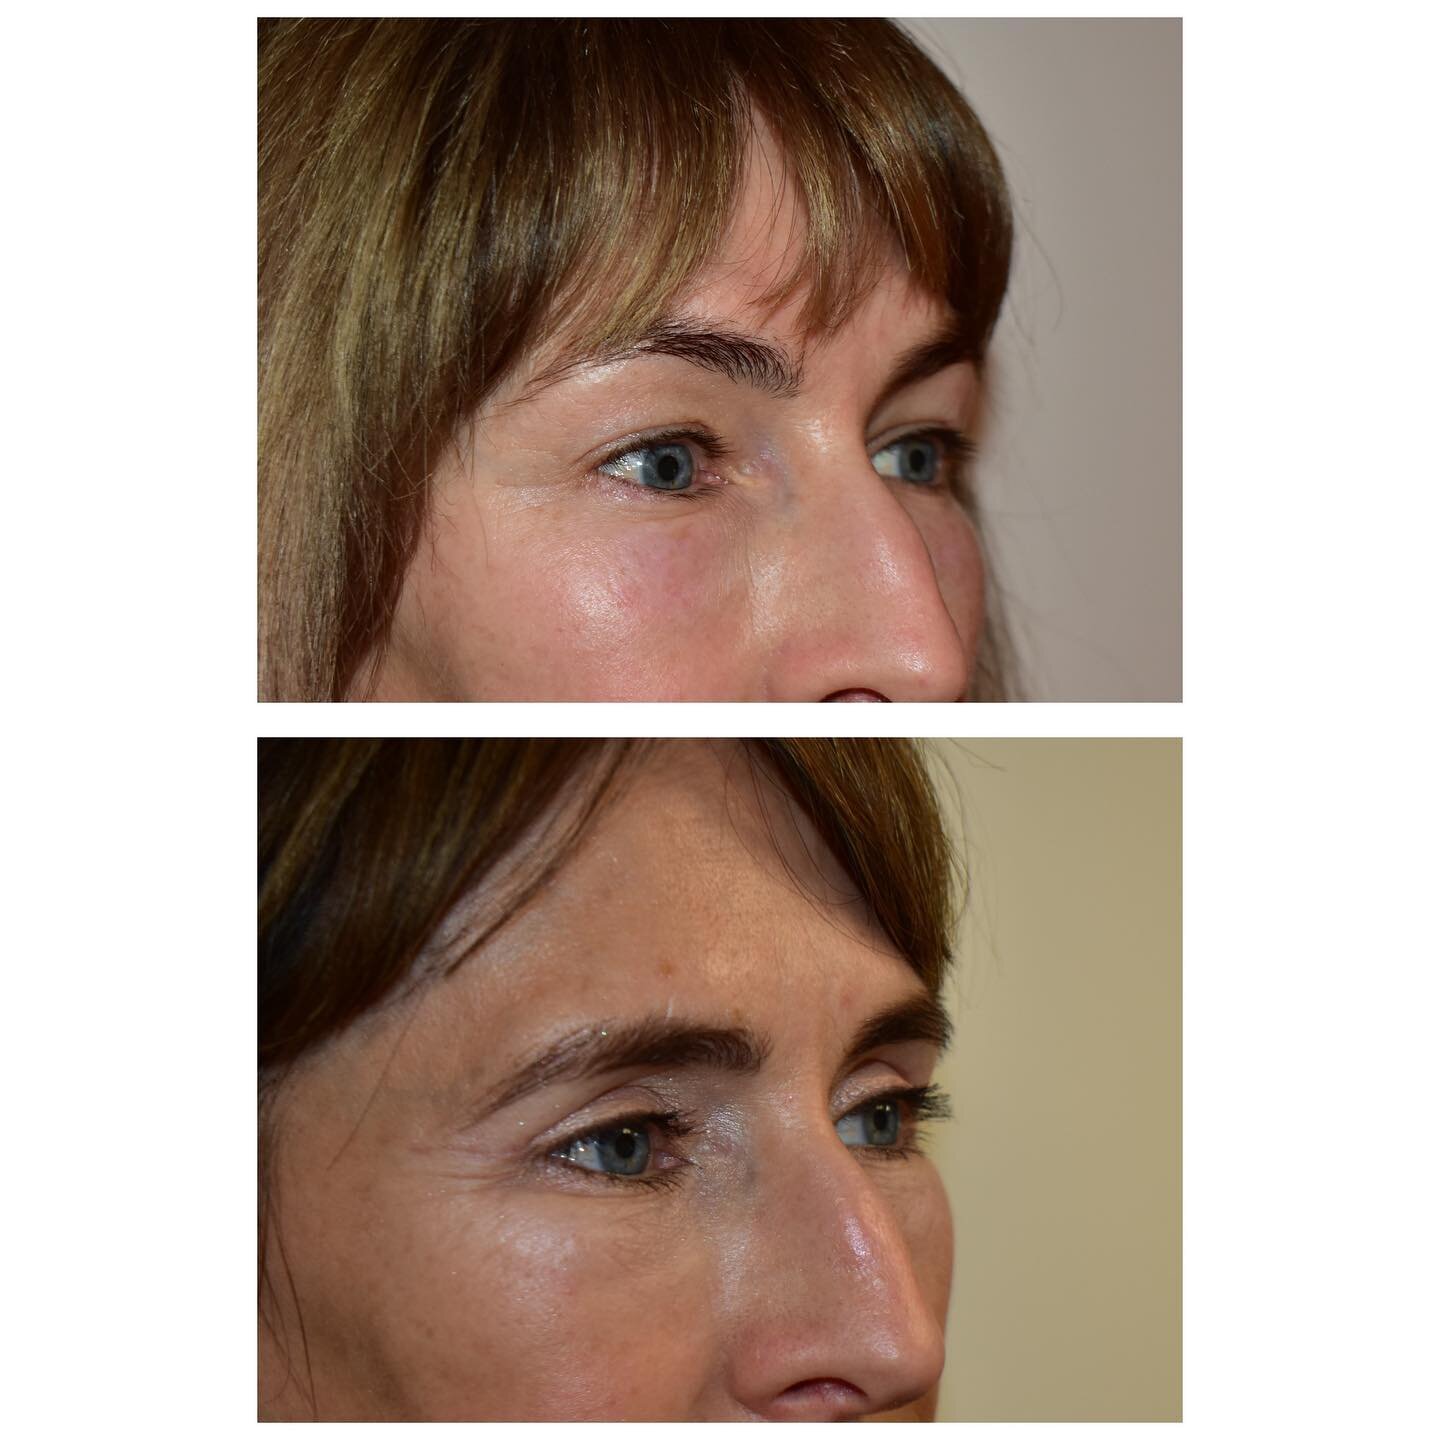 Fantastic results of an Upper and Lower Blepharoplasty performed by Mr Carver. 

These photos are taken around 8 weeks after surgery. 

#blepharoplasty#eyesurgery#lookyounger#confidence#transformation#plasticsurgery#cosmeticsurgery#consultation#amazi